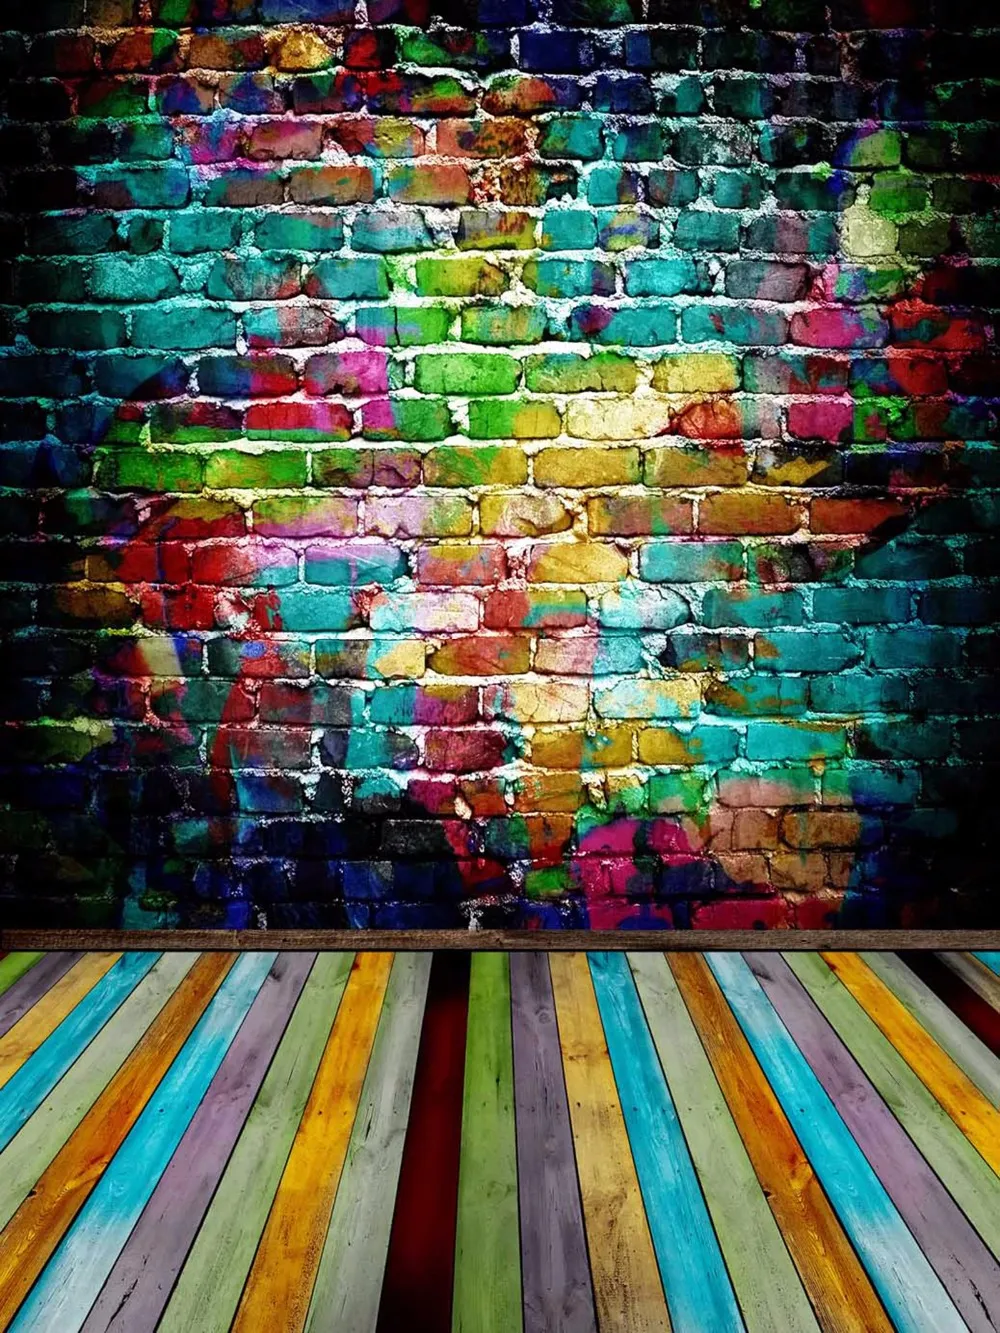 Digital Painted Colorful Brick Wall Photography Backdrop Wooden Planks Floor Kids Children Photo Background Baby Newborn Booth Wallpaper